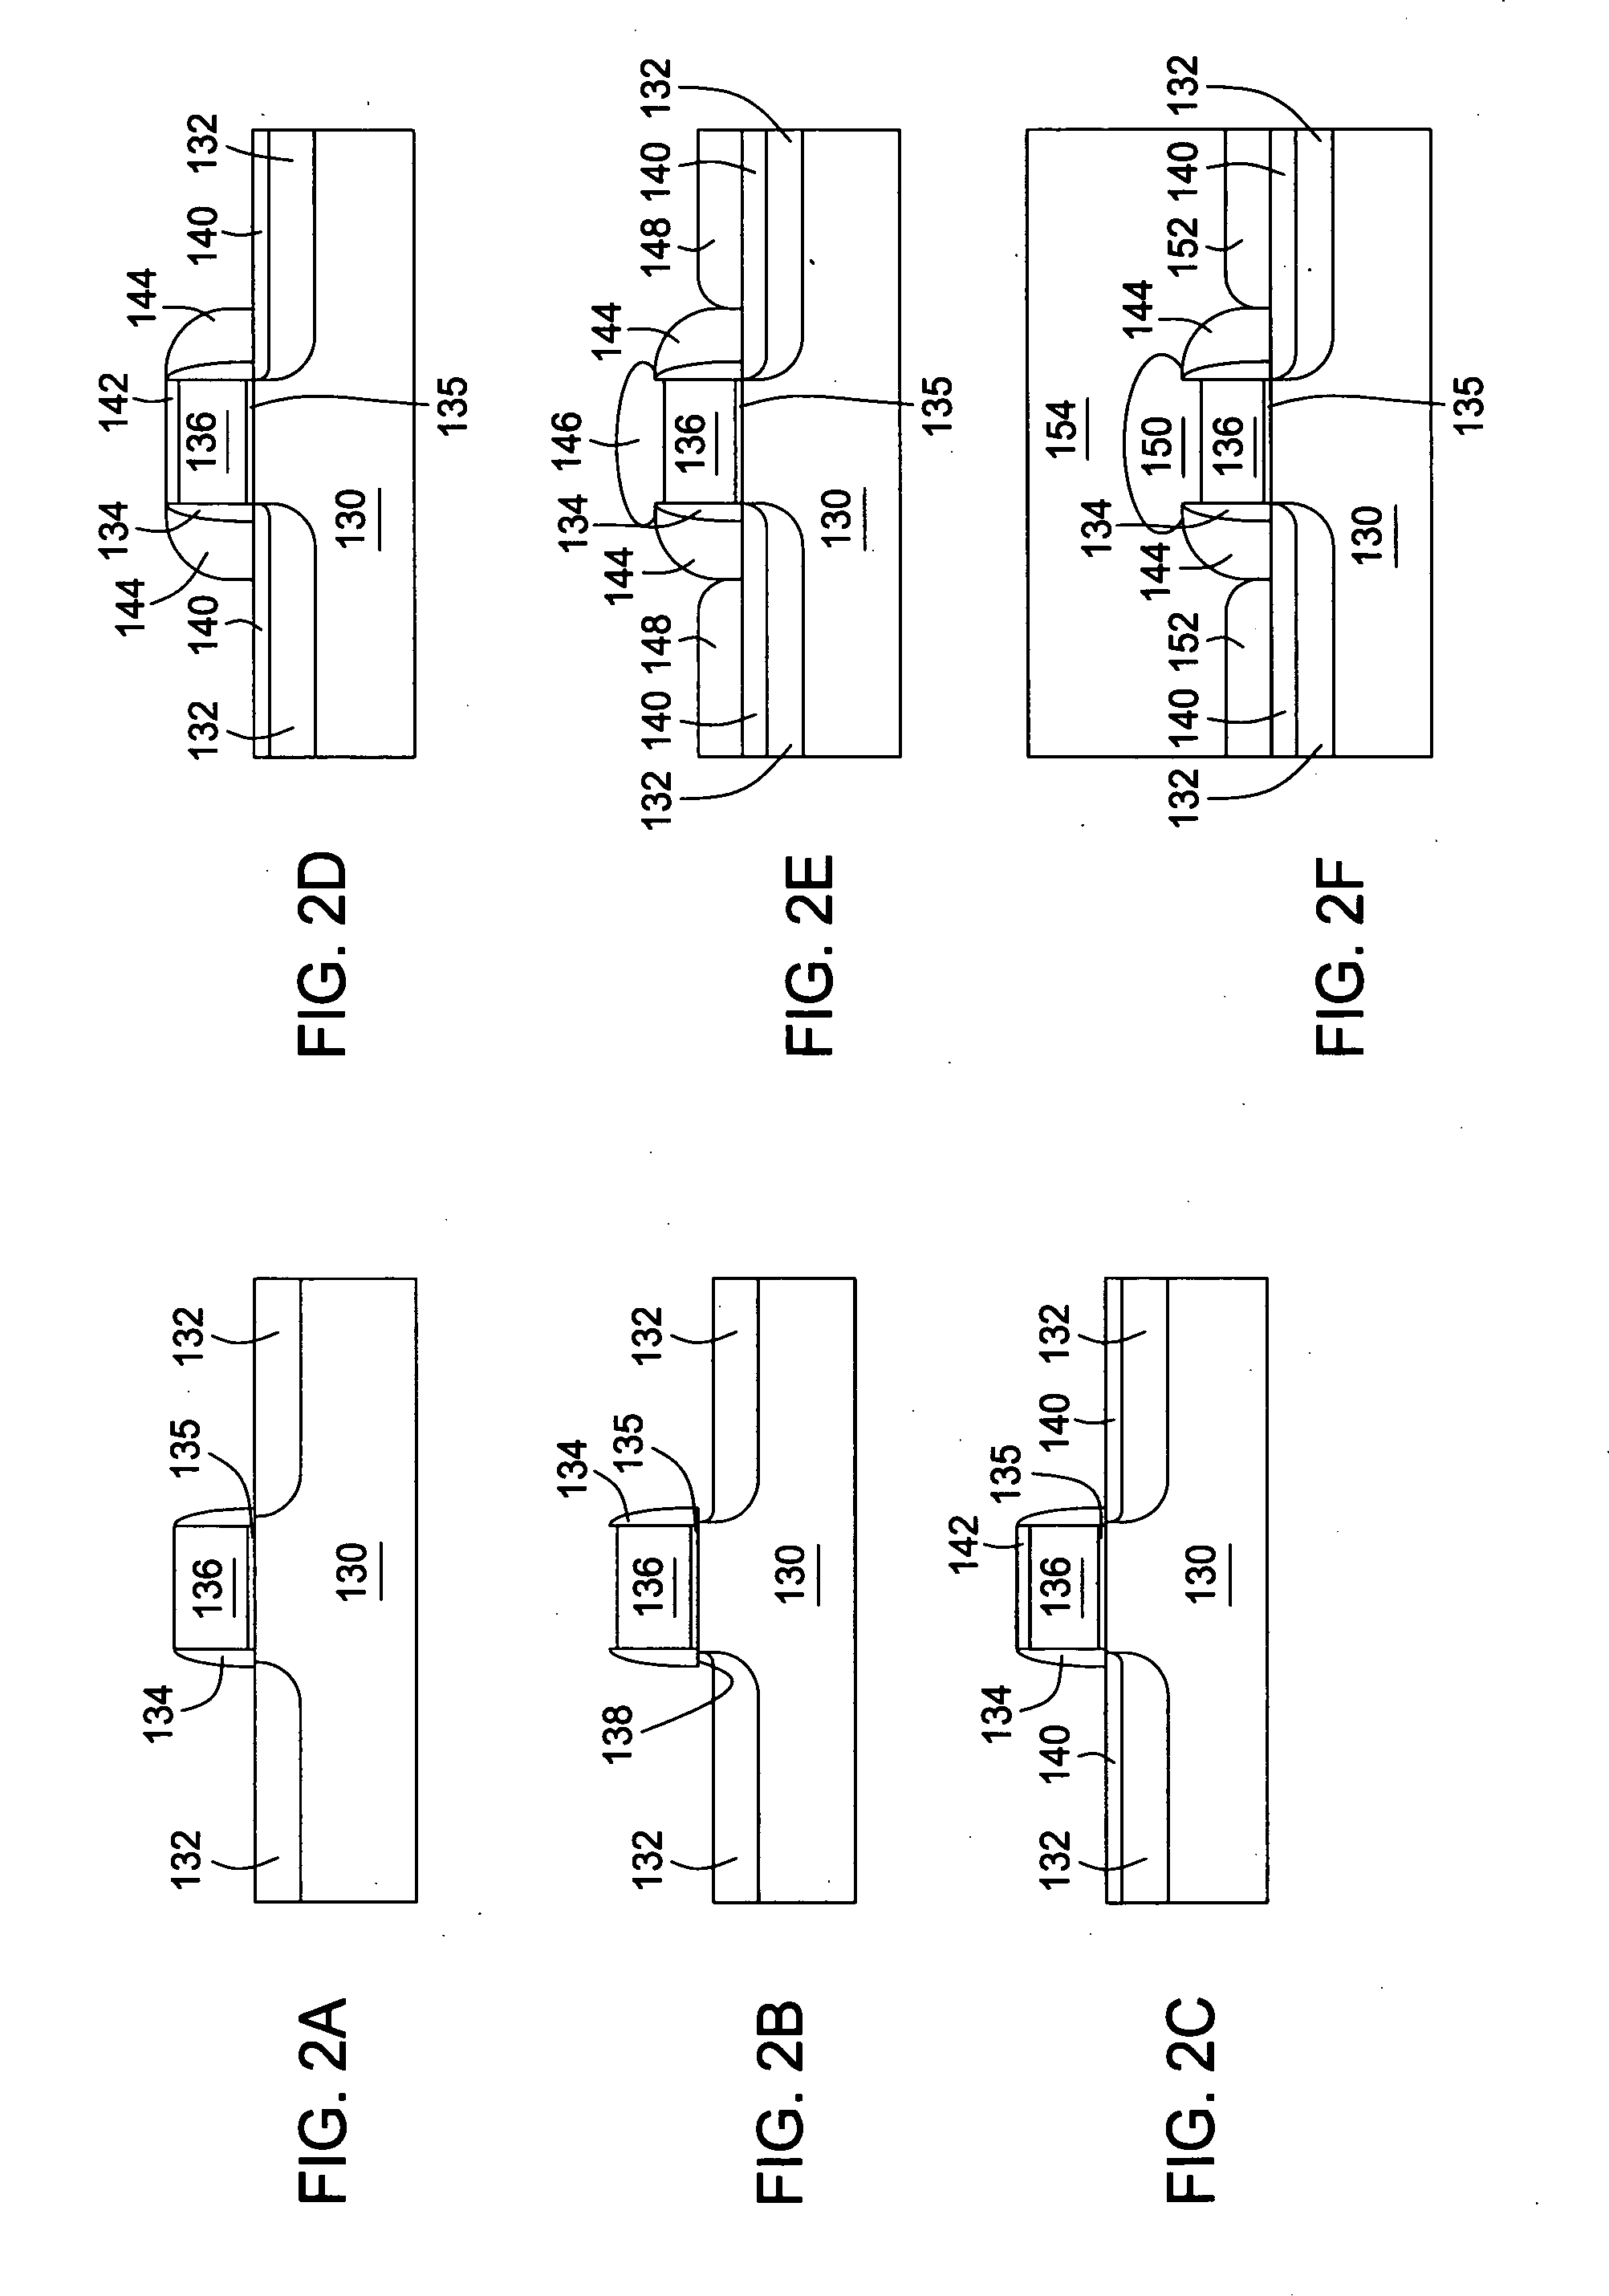 Methods to fabricate MOSFET devices using selective deposition process